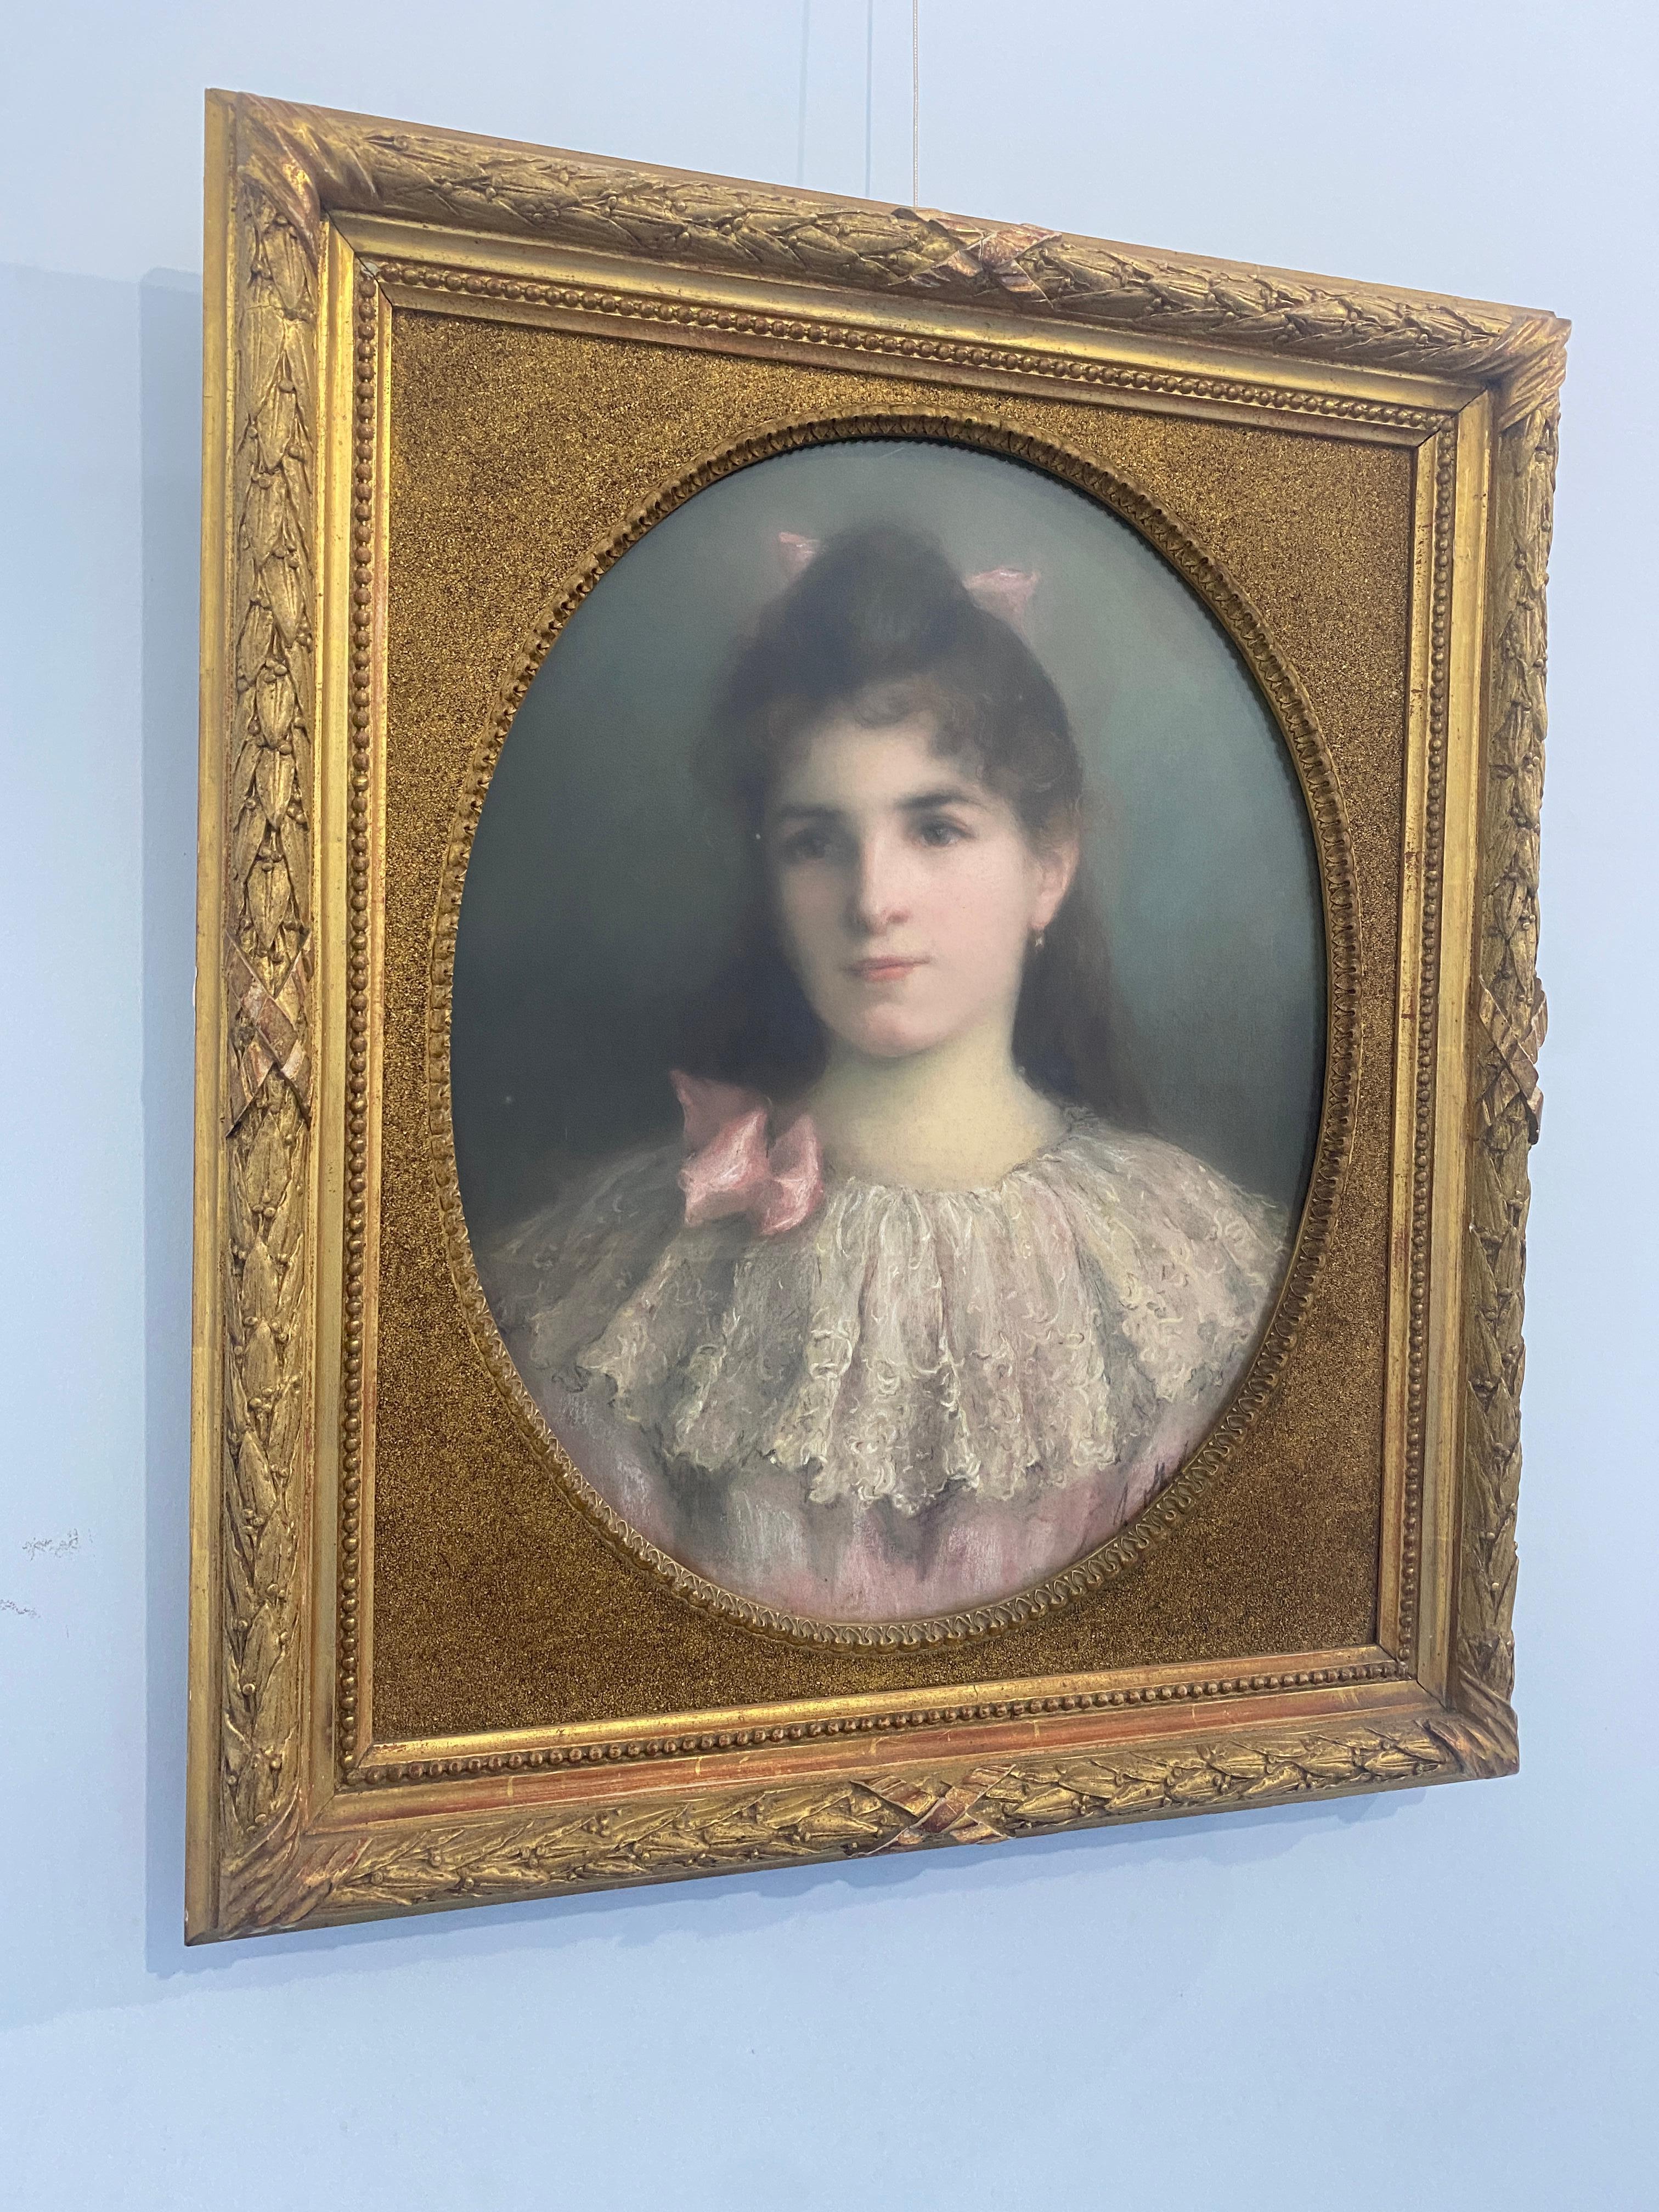 Stunning French pastel painting executed in 1899,signed,the author demonstrates great skill in capturing the tenderness of the maiden's gaze,her eyes speak.Of a sure academic school,the author reveals great skill in painting the rich details of the